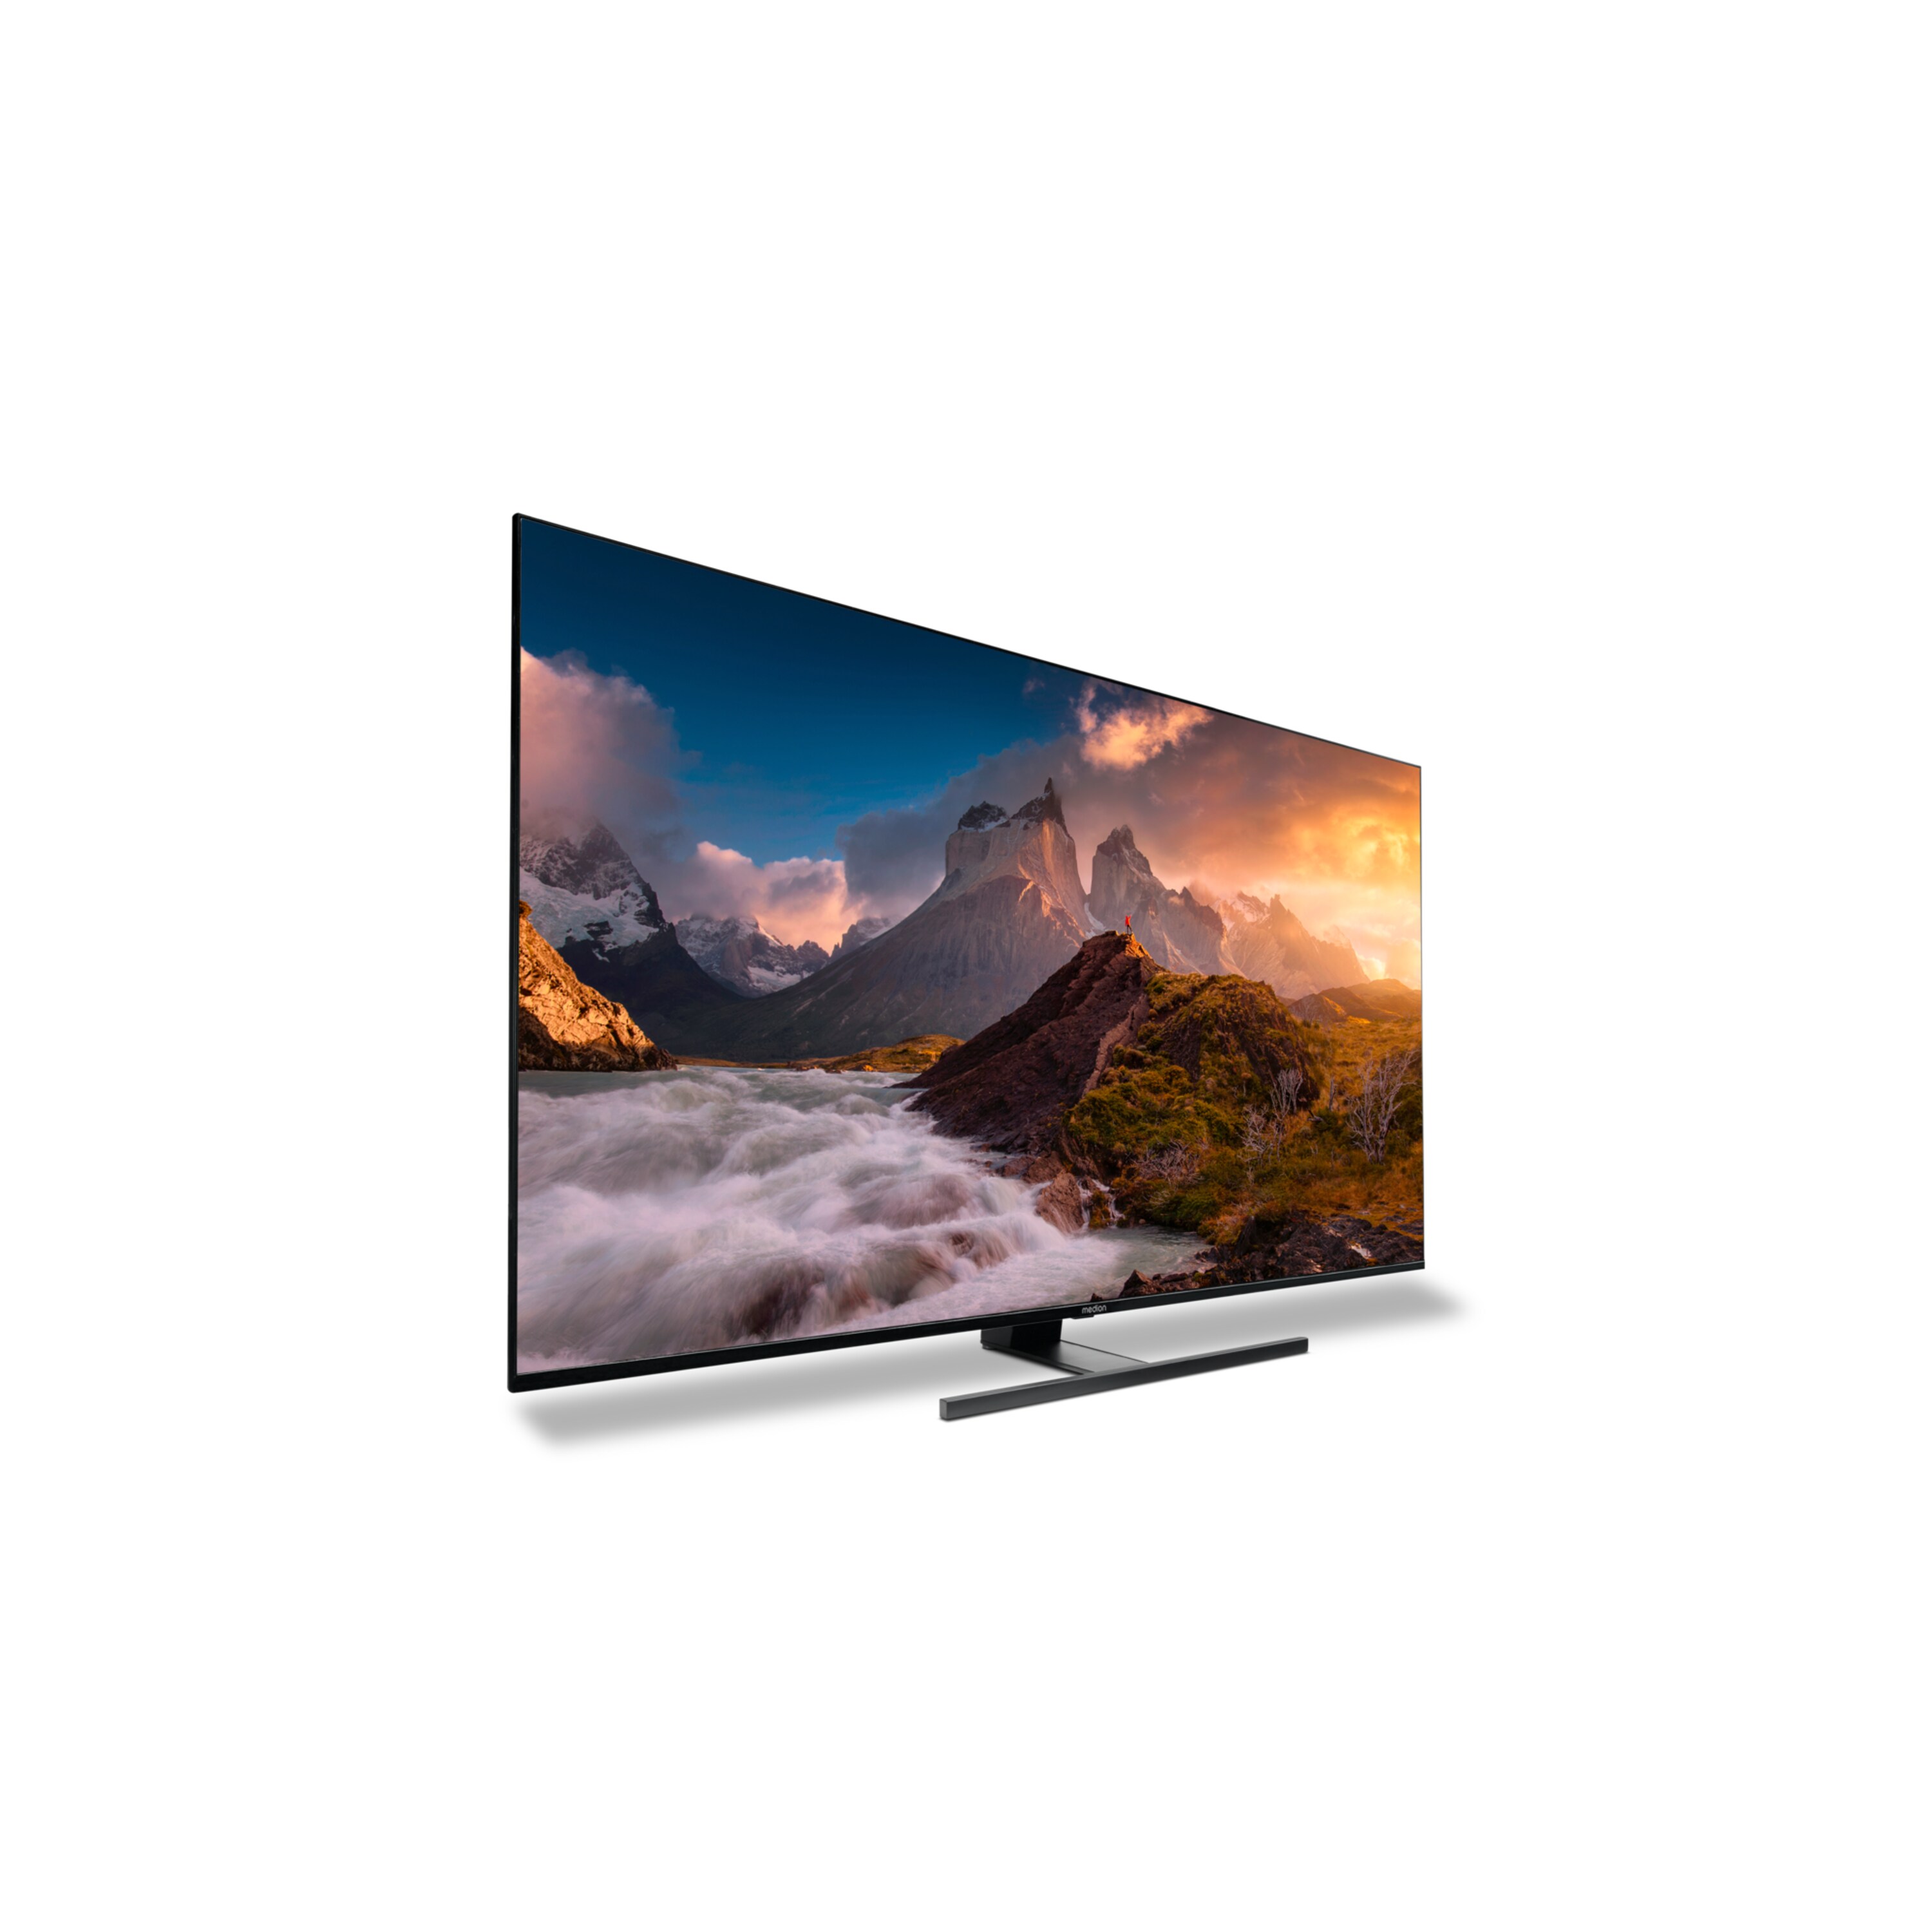 MEDION® LIFE® X16507 (MD 31173) QLED Android TV, 163,9 cm (65'') Ultra HD Smart-TV, HDR, Dolby Vision®, Micro Dimming, MEMC, PVR ready, Netflix, Amazon Prime Video, Bluetooth®, DTS Virtual X, DTS X und Dolby Atmos, HD Triple Tuner, CI+